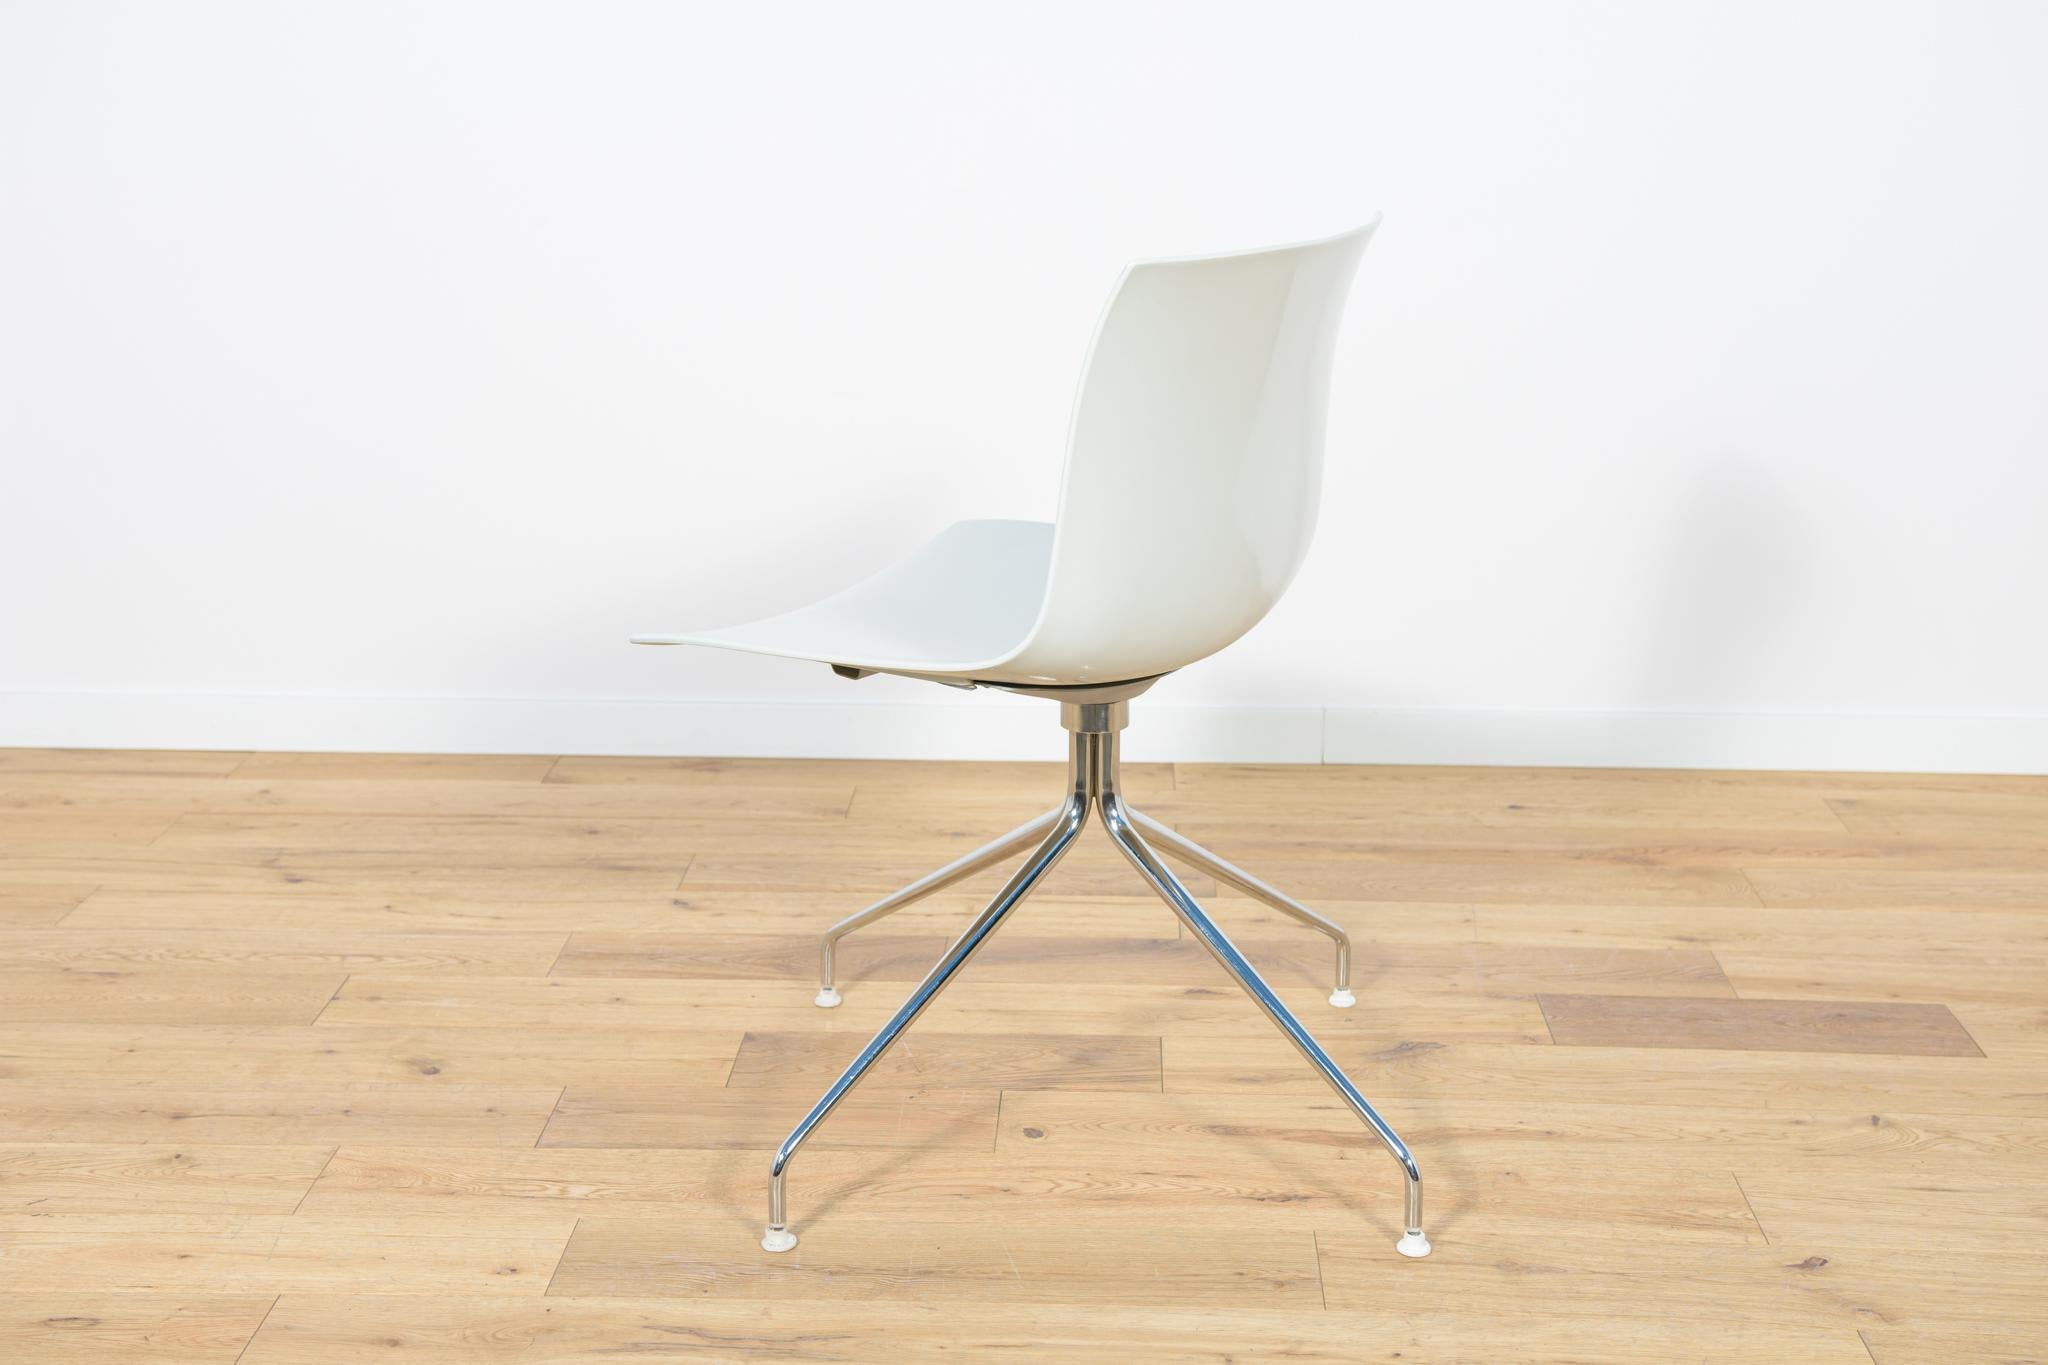 Steel Catifa 53 Desk Chair by Lievore Altherr Molina for Arper, 2000s For Sale